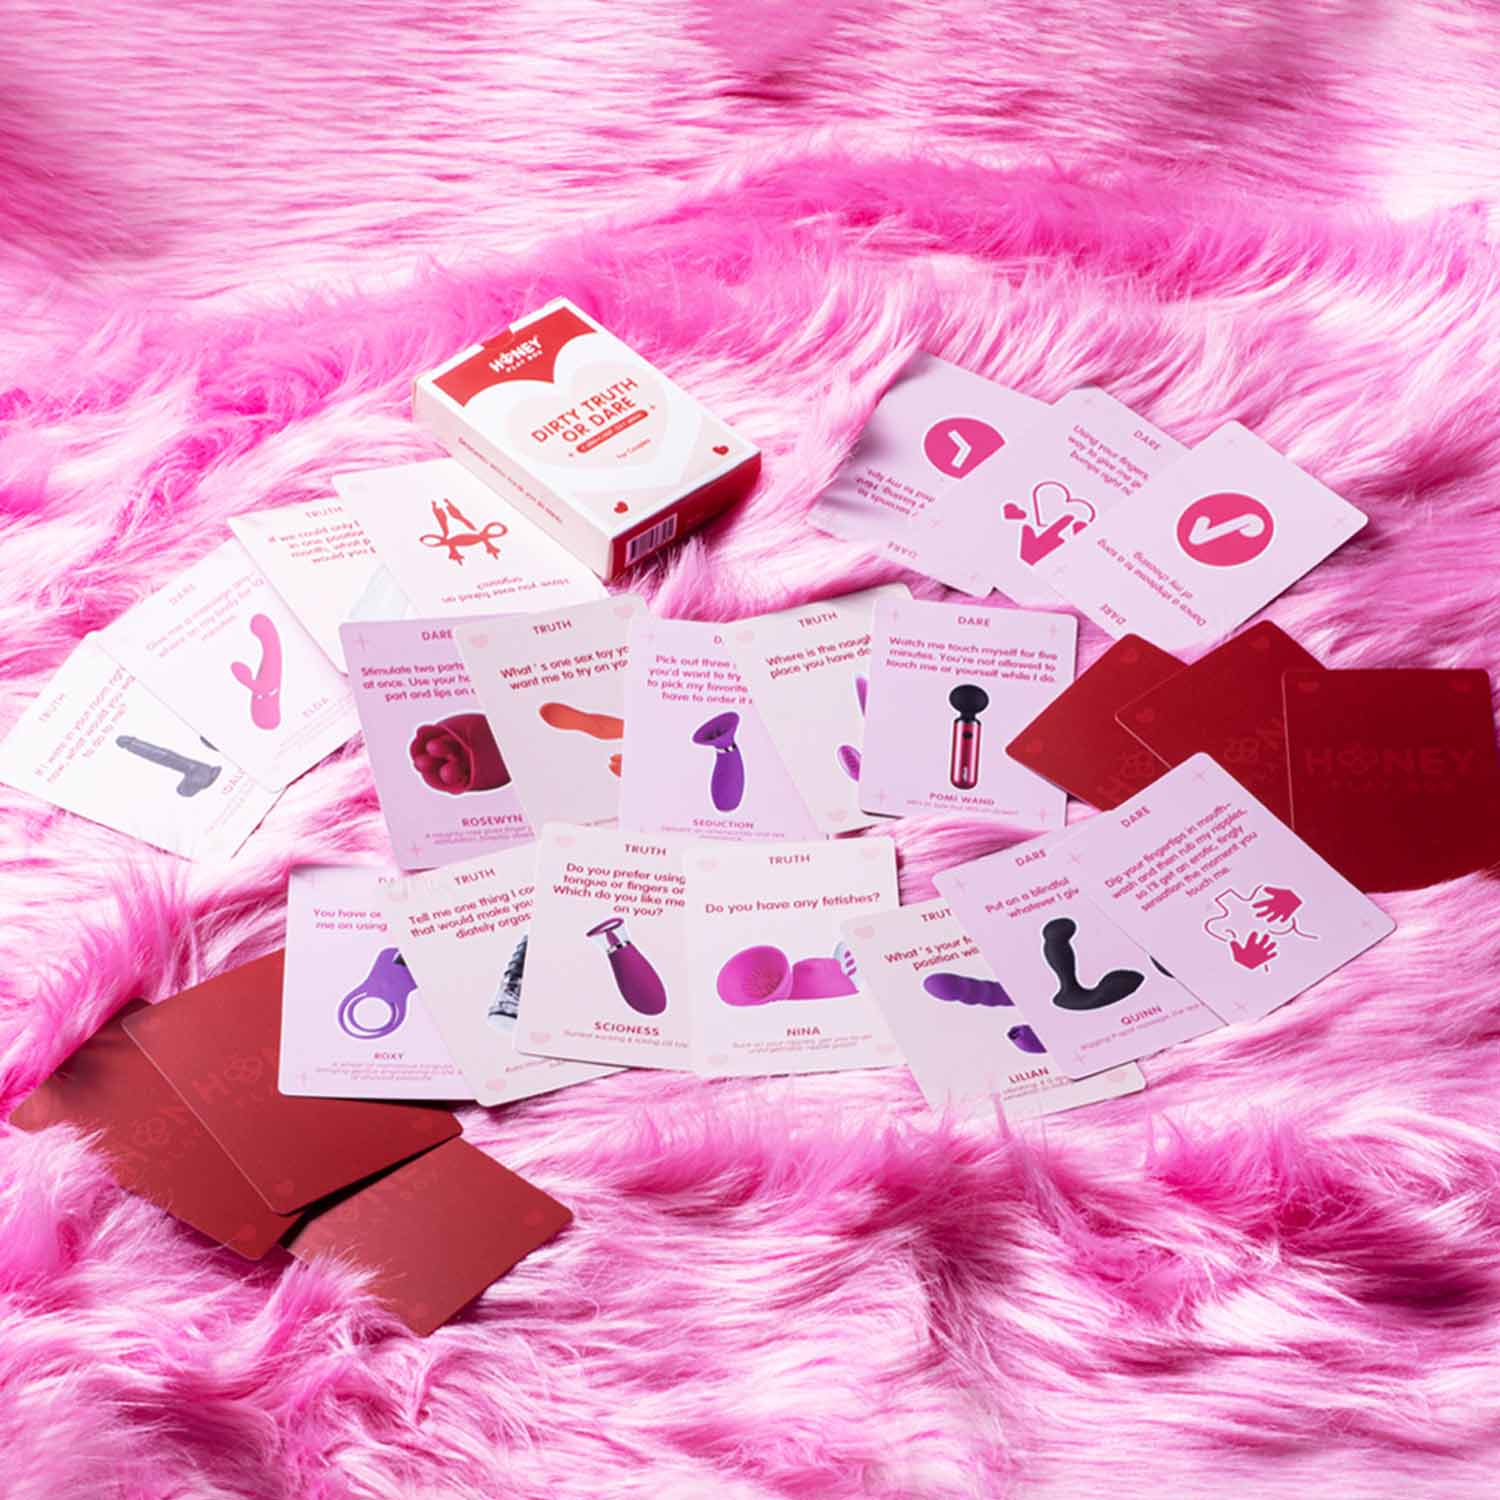 True or Dare - Sexual Card Game for Couples